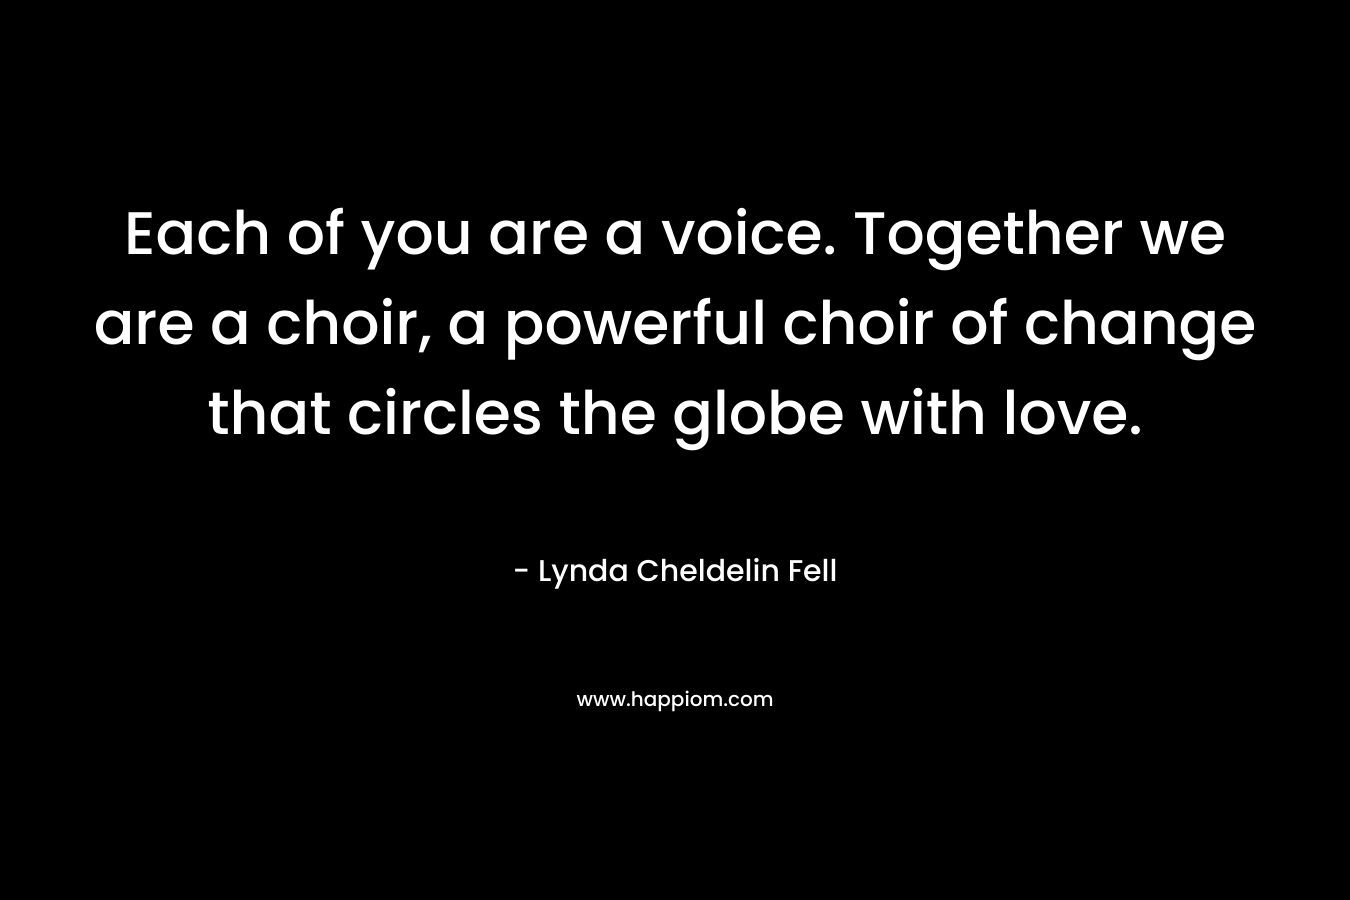 Each of you are a voice. Together we are a choir, a powerful choir of change that circles the globe with love. – Lynda Cheldelin Fell